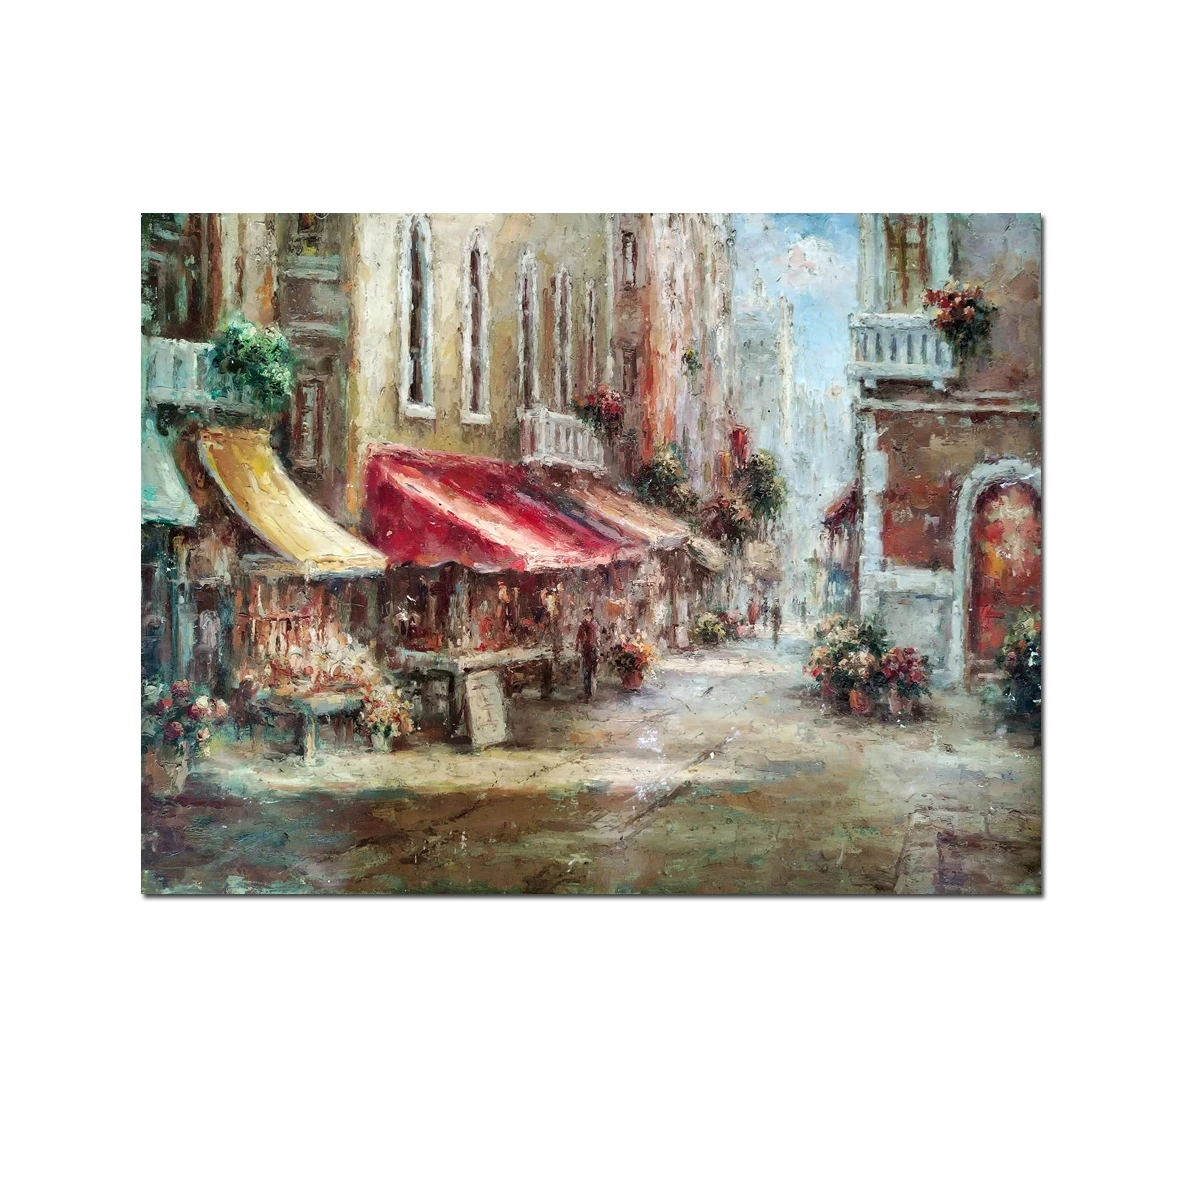 

Hand Painted Oil Painting Classical IMPRESSIONISM Urban Street Scene Flowers Landscape Reproduction on Canvas Wall Art Home Deco